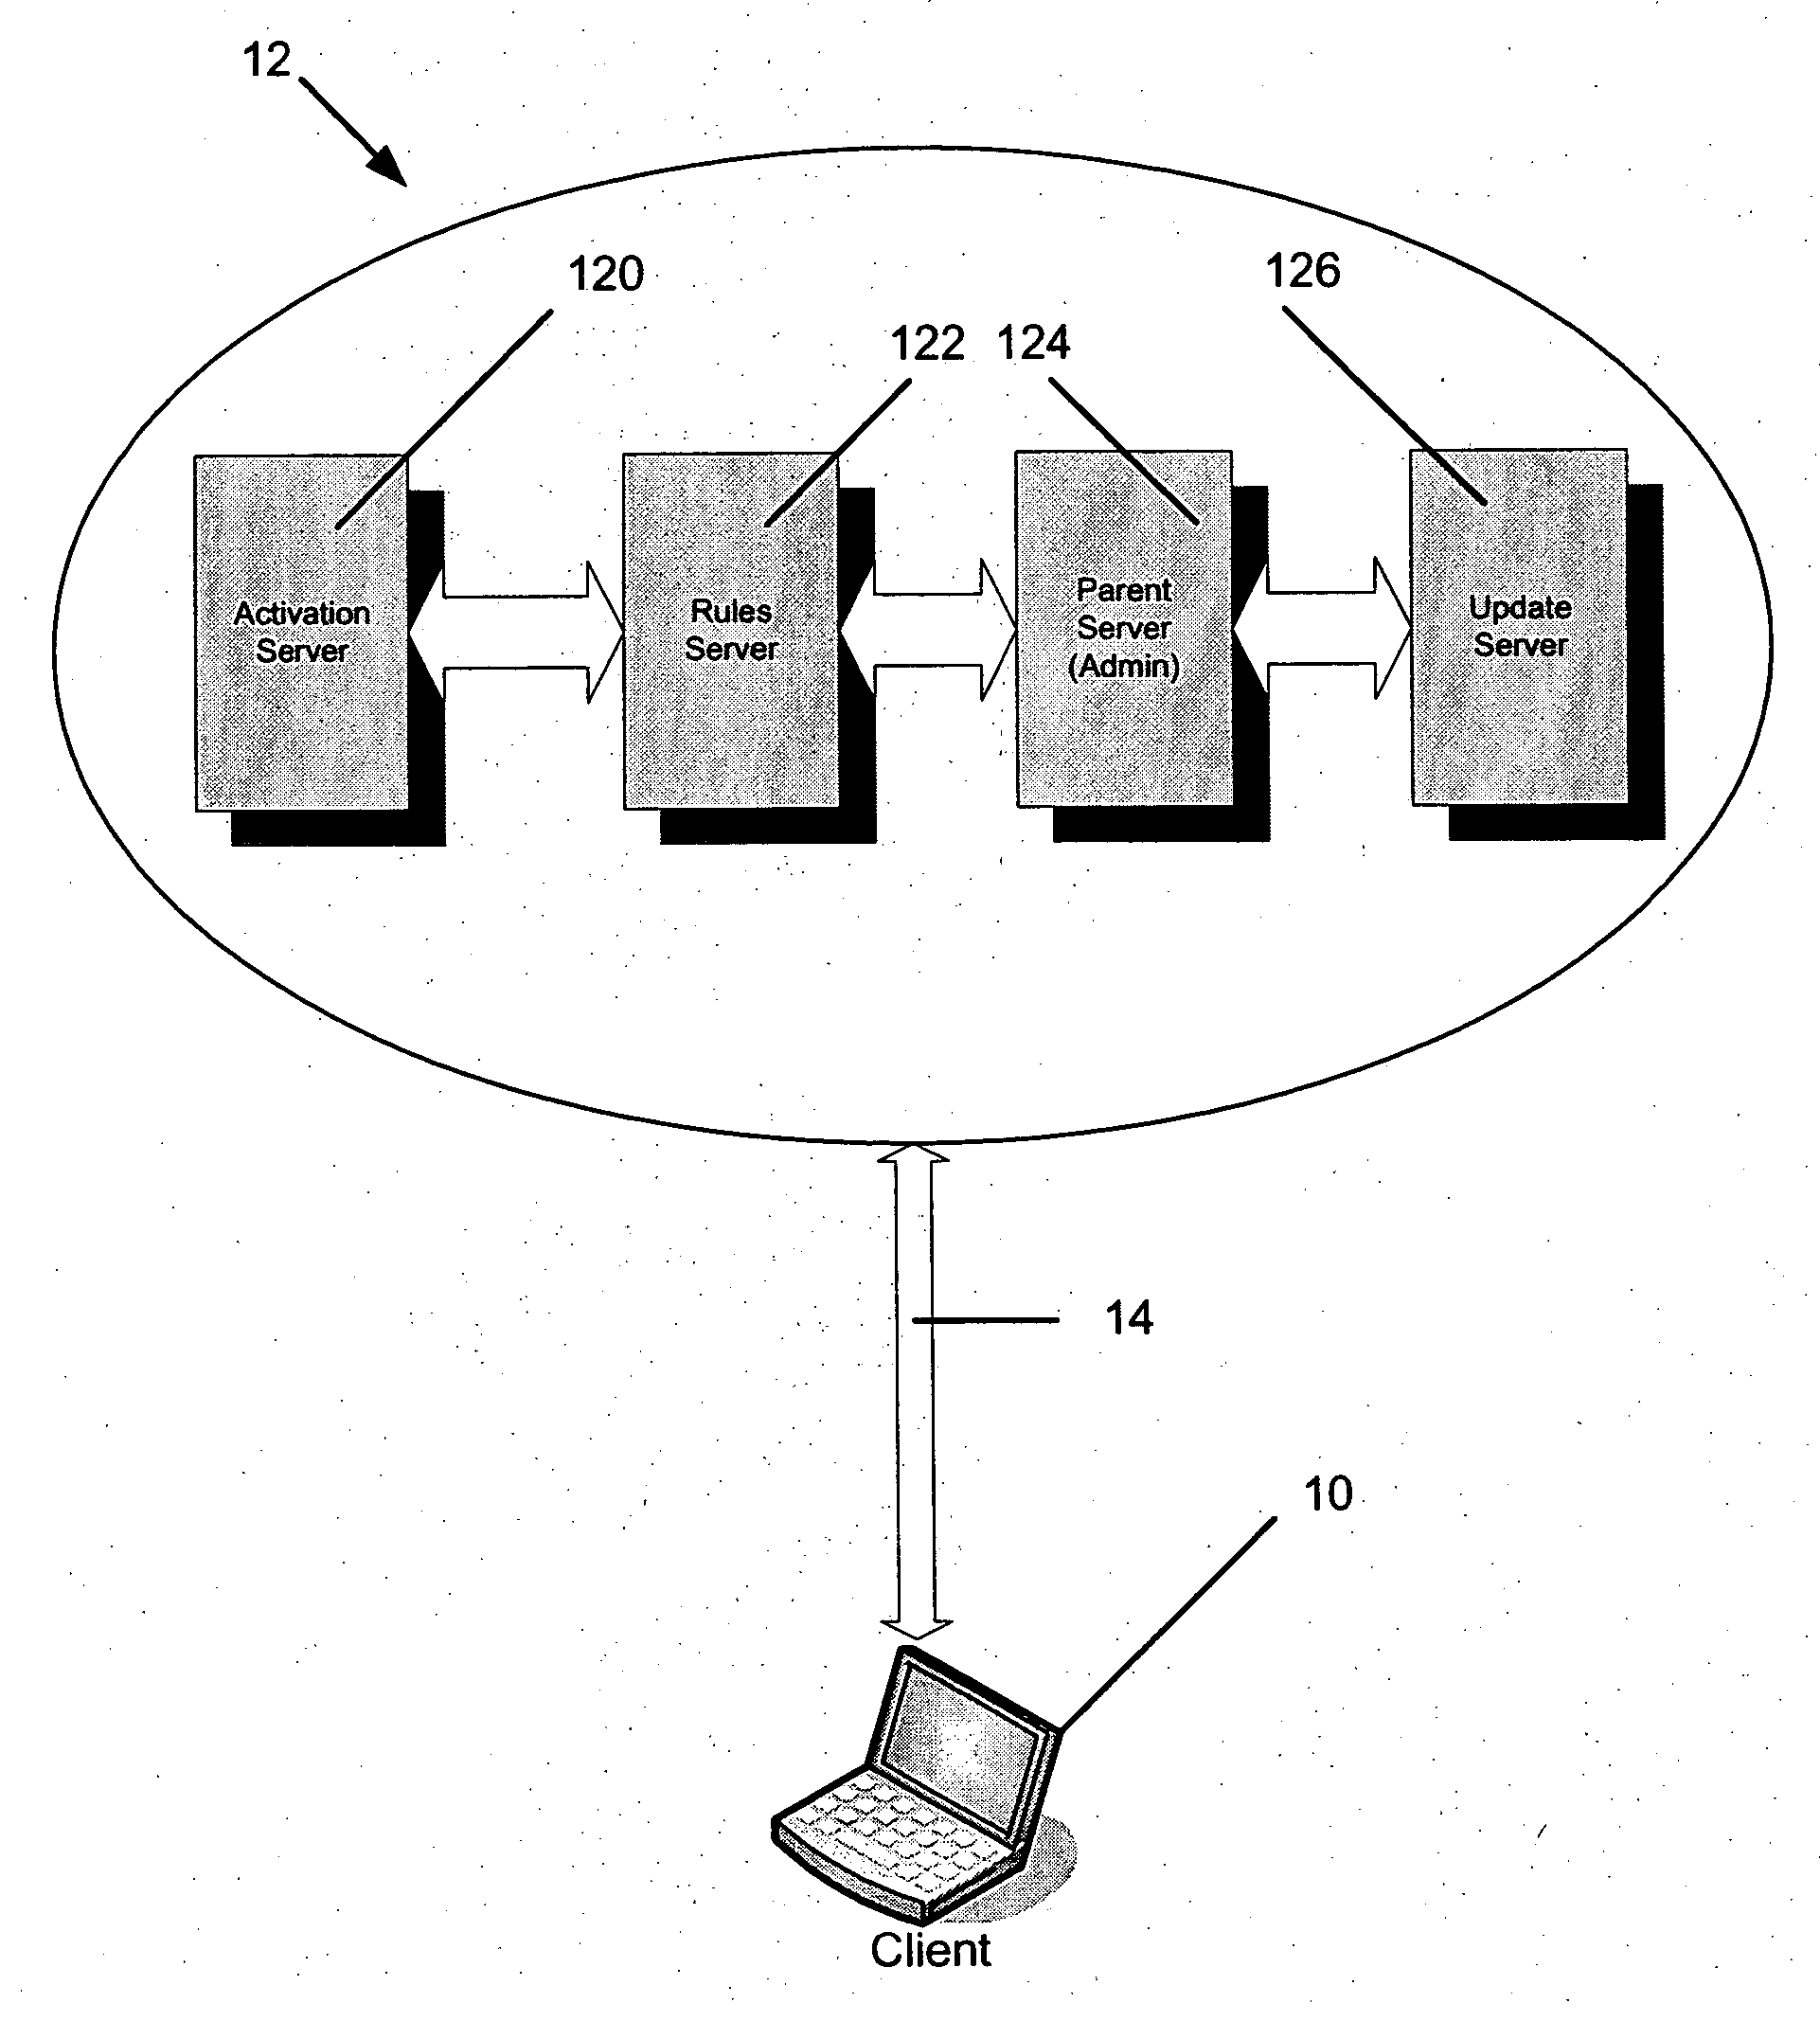 System and method for lost data destruction of electronic data stored on portable electronic devices